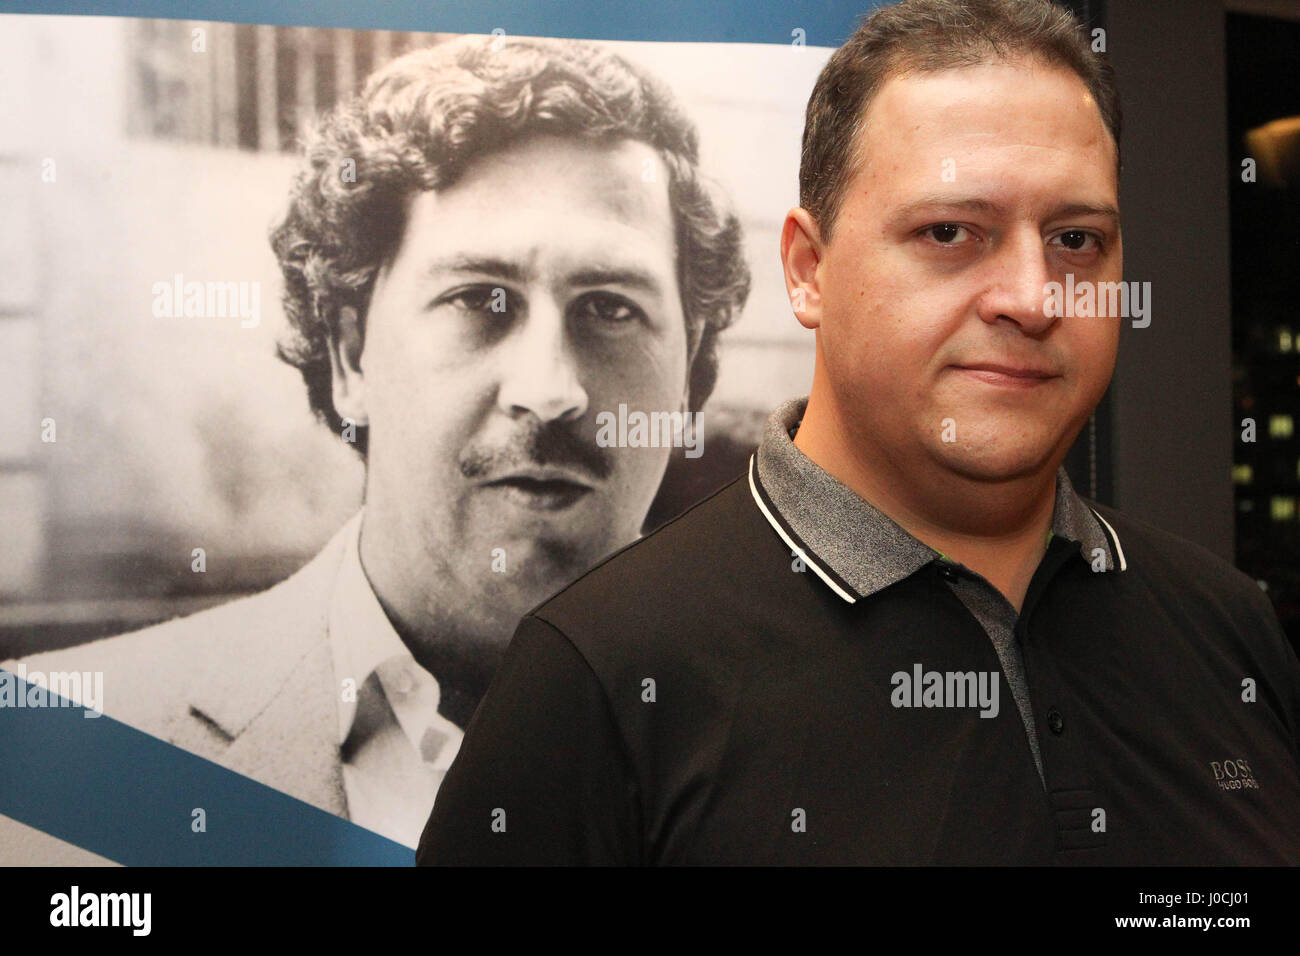 The Son of Colombian Drug Lord Pablo Escobar Juan Pablo Escobar Henao poses  with His Book "Pablo Escobar My Father" in Athens Greece Stock Photo - Alamy